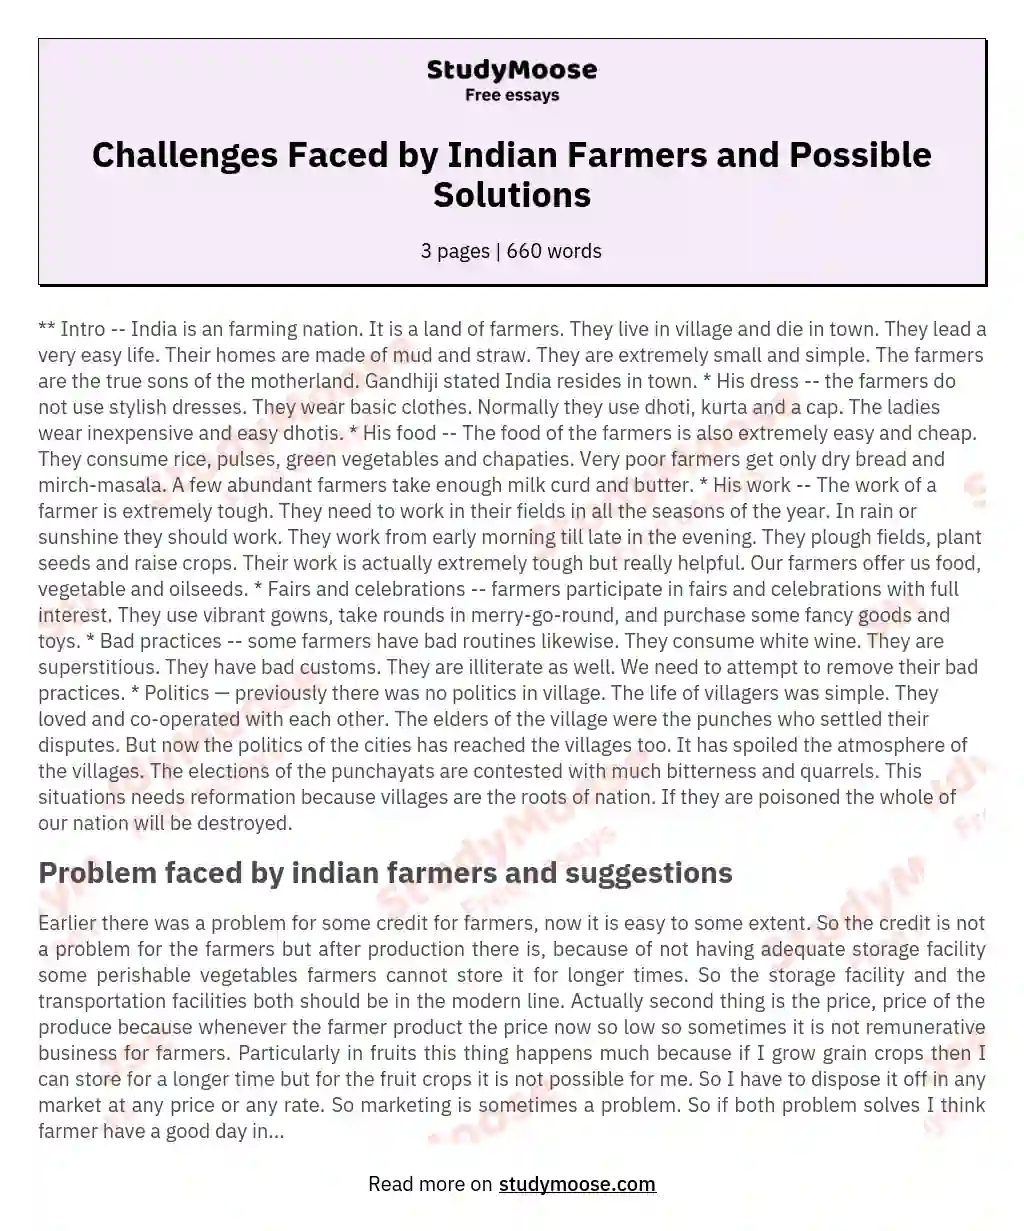 Challenges Faced by Indian Farmers and Possible Solutions essay